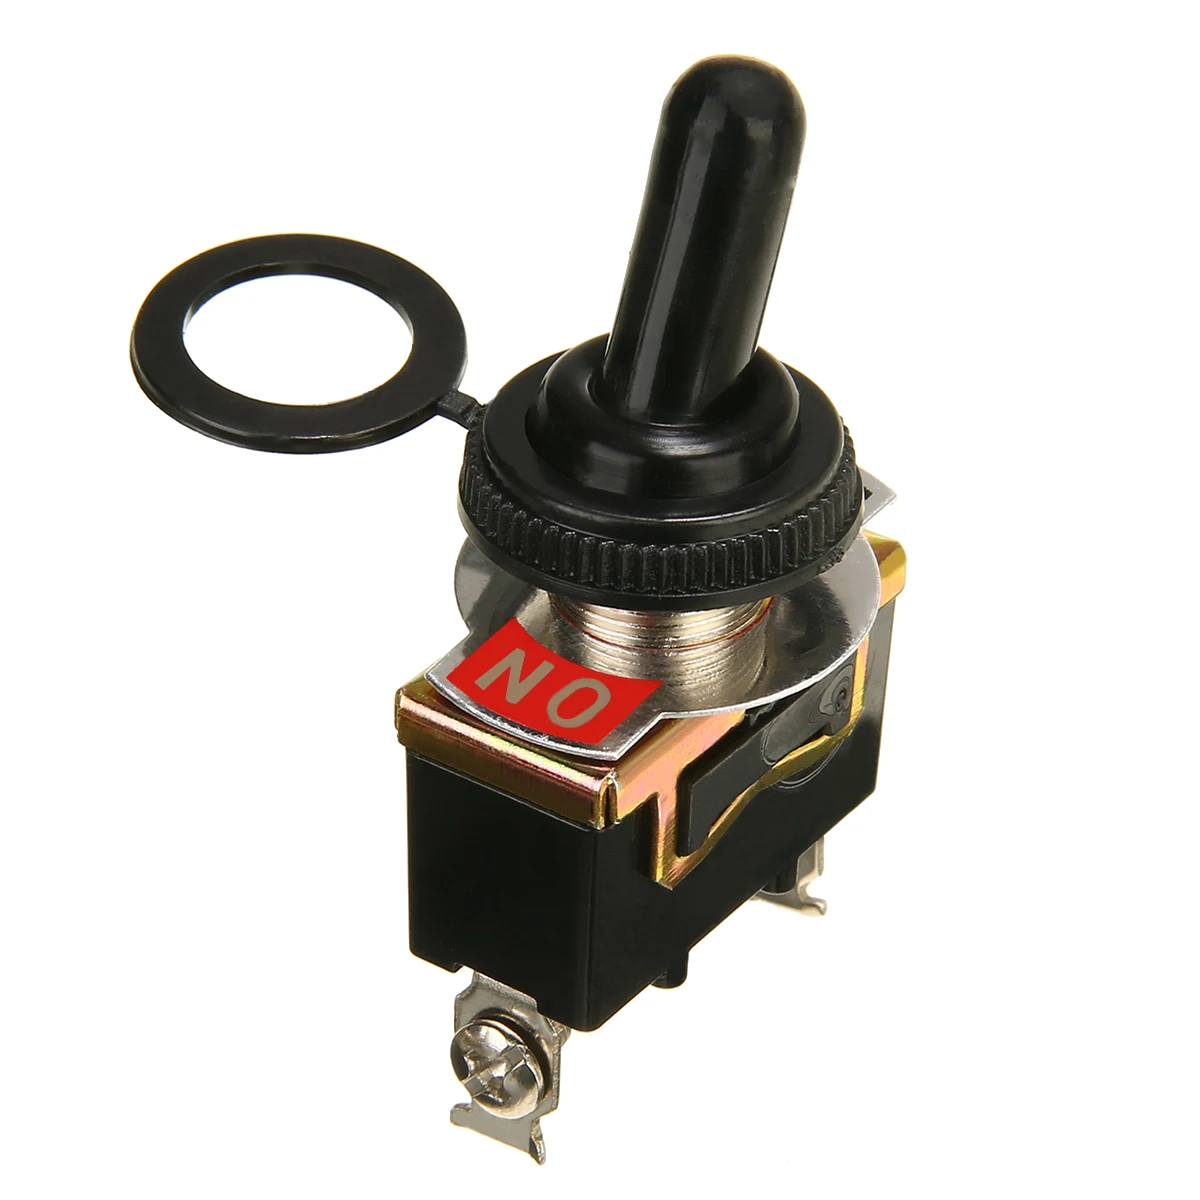 SPST 2Pin Car Boat 15A 250V ON/OFF Rocker Toggle Waterproof Boot New U2Y6